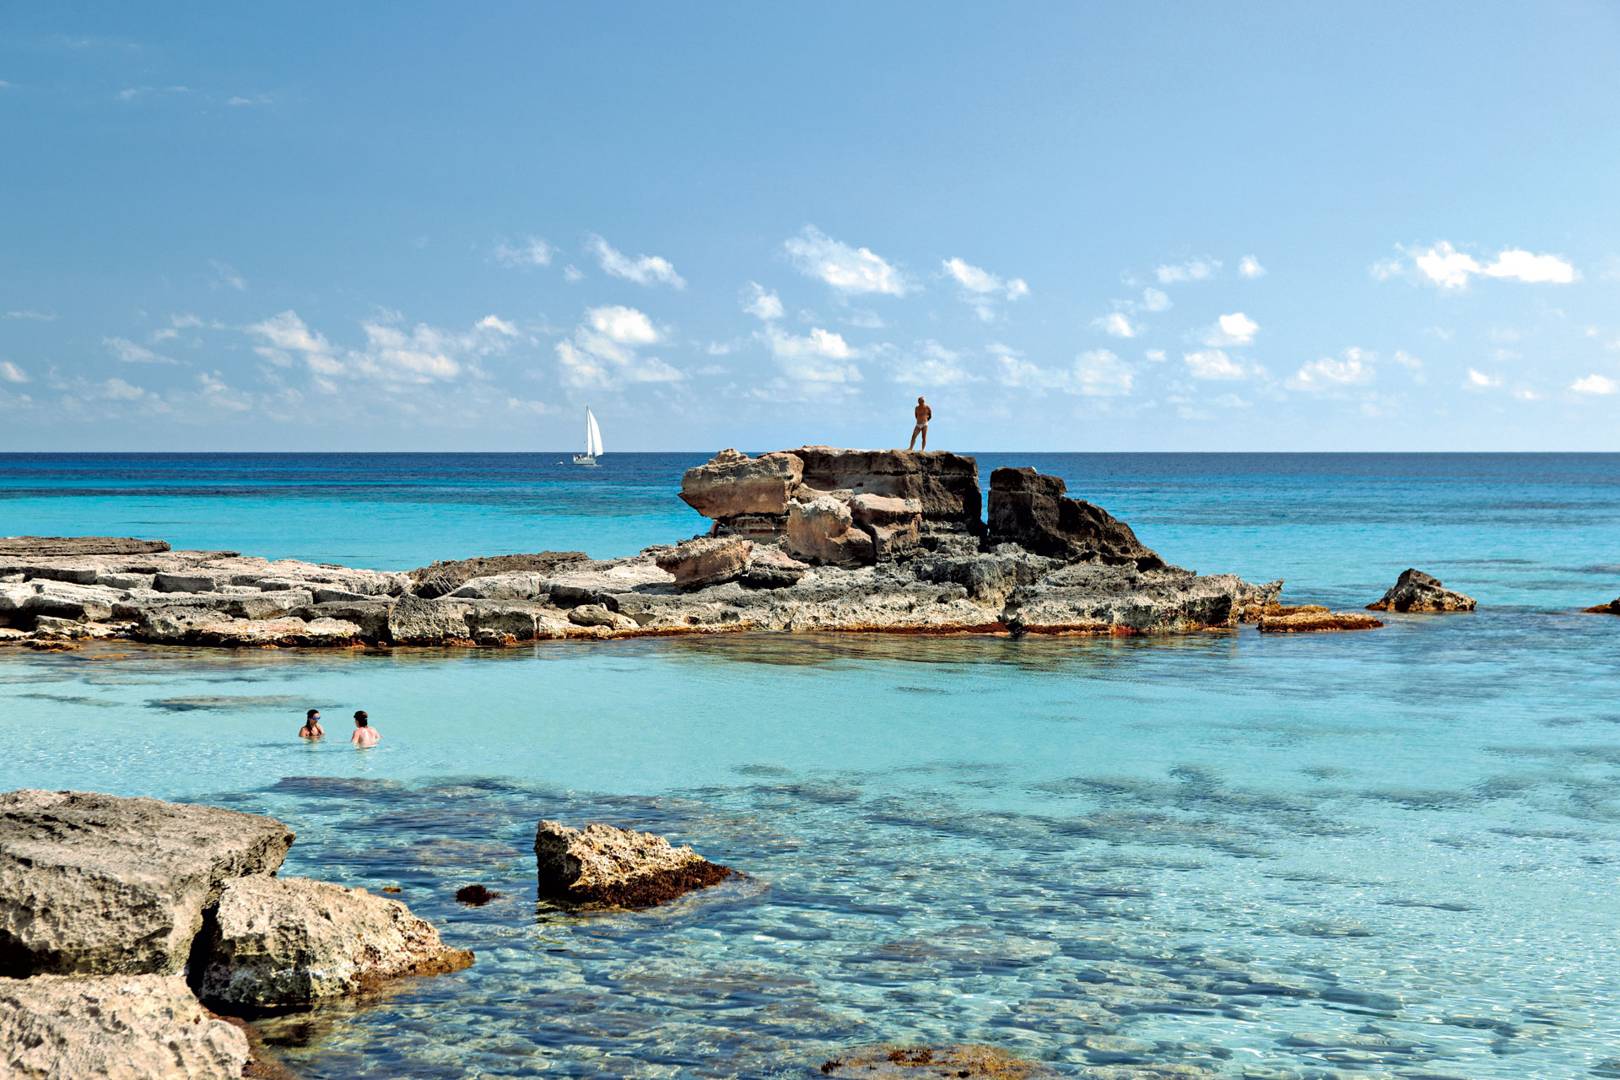 Caught Looking At Nude Beach - Best beaches in Formentera, Spain | CN Traveller